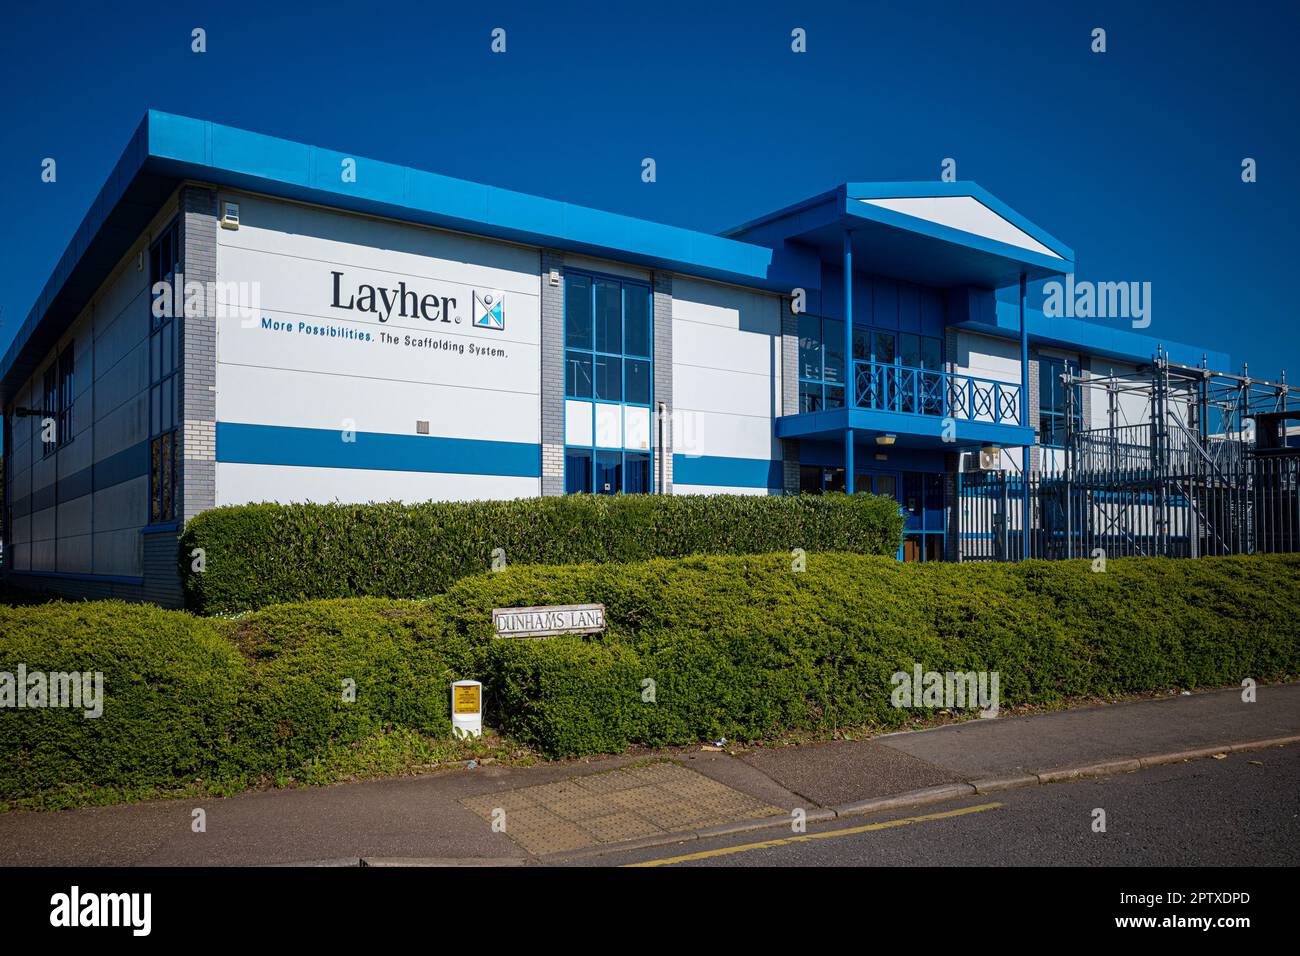 Layher Ltd UK on Works Road Letchworth Garden City. Layher is a german based manufacturer of scaffolding products. Layher Holding GmbH & Co. KG. Stock Photo